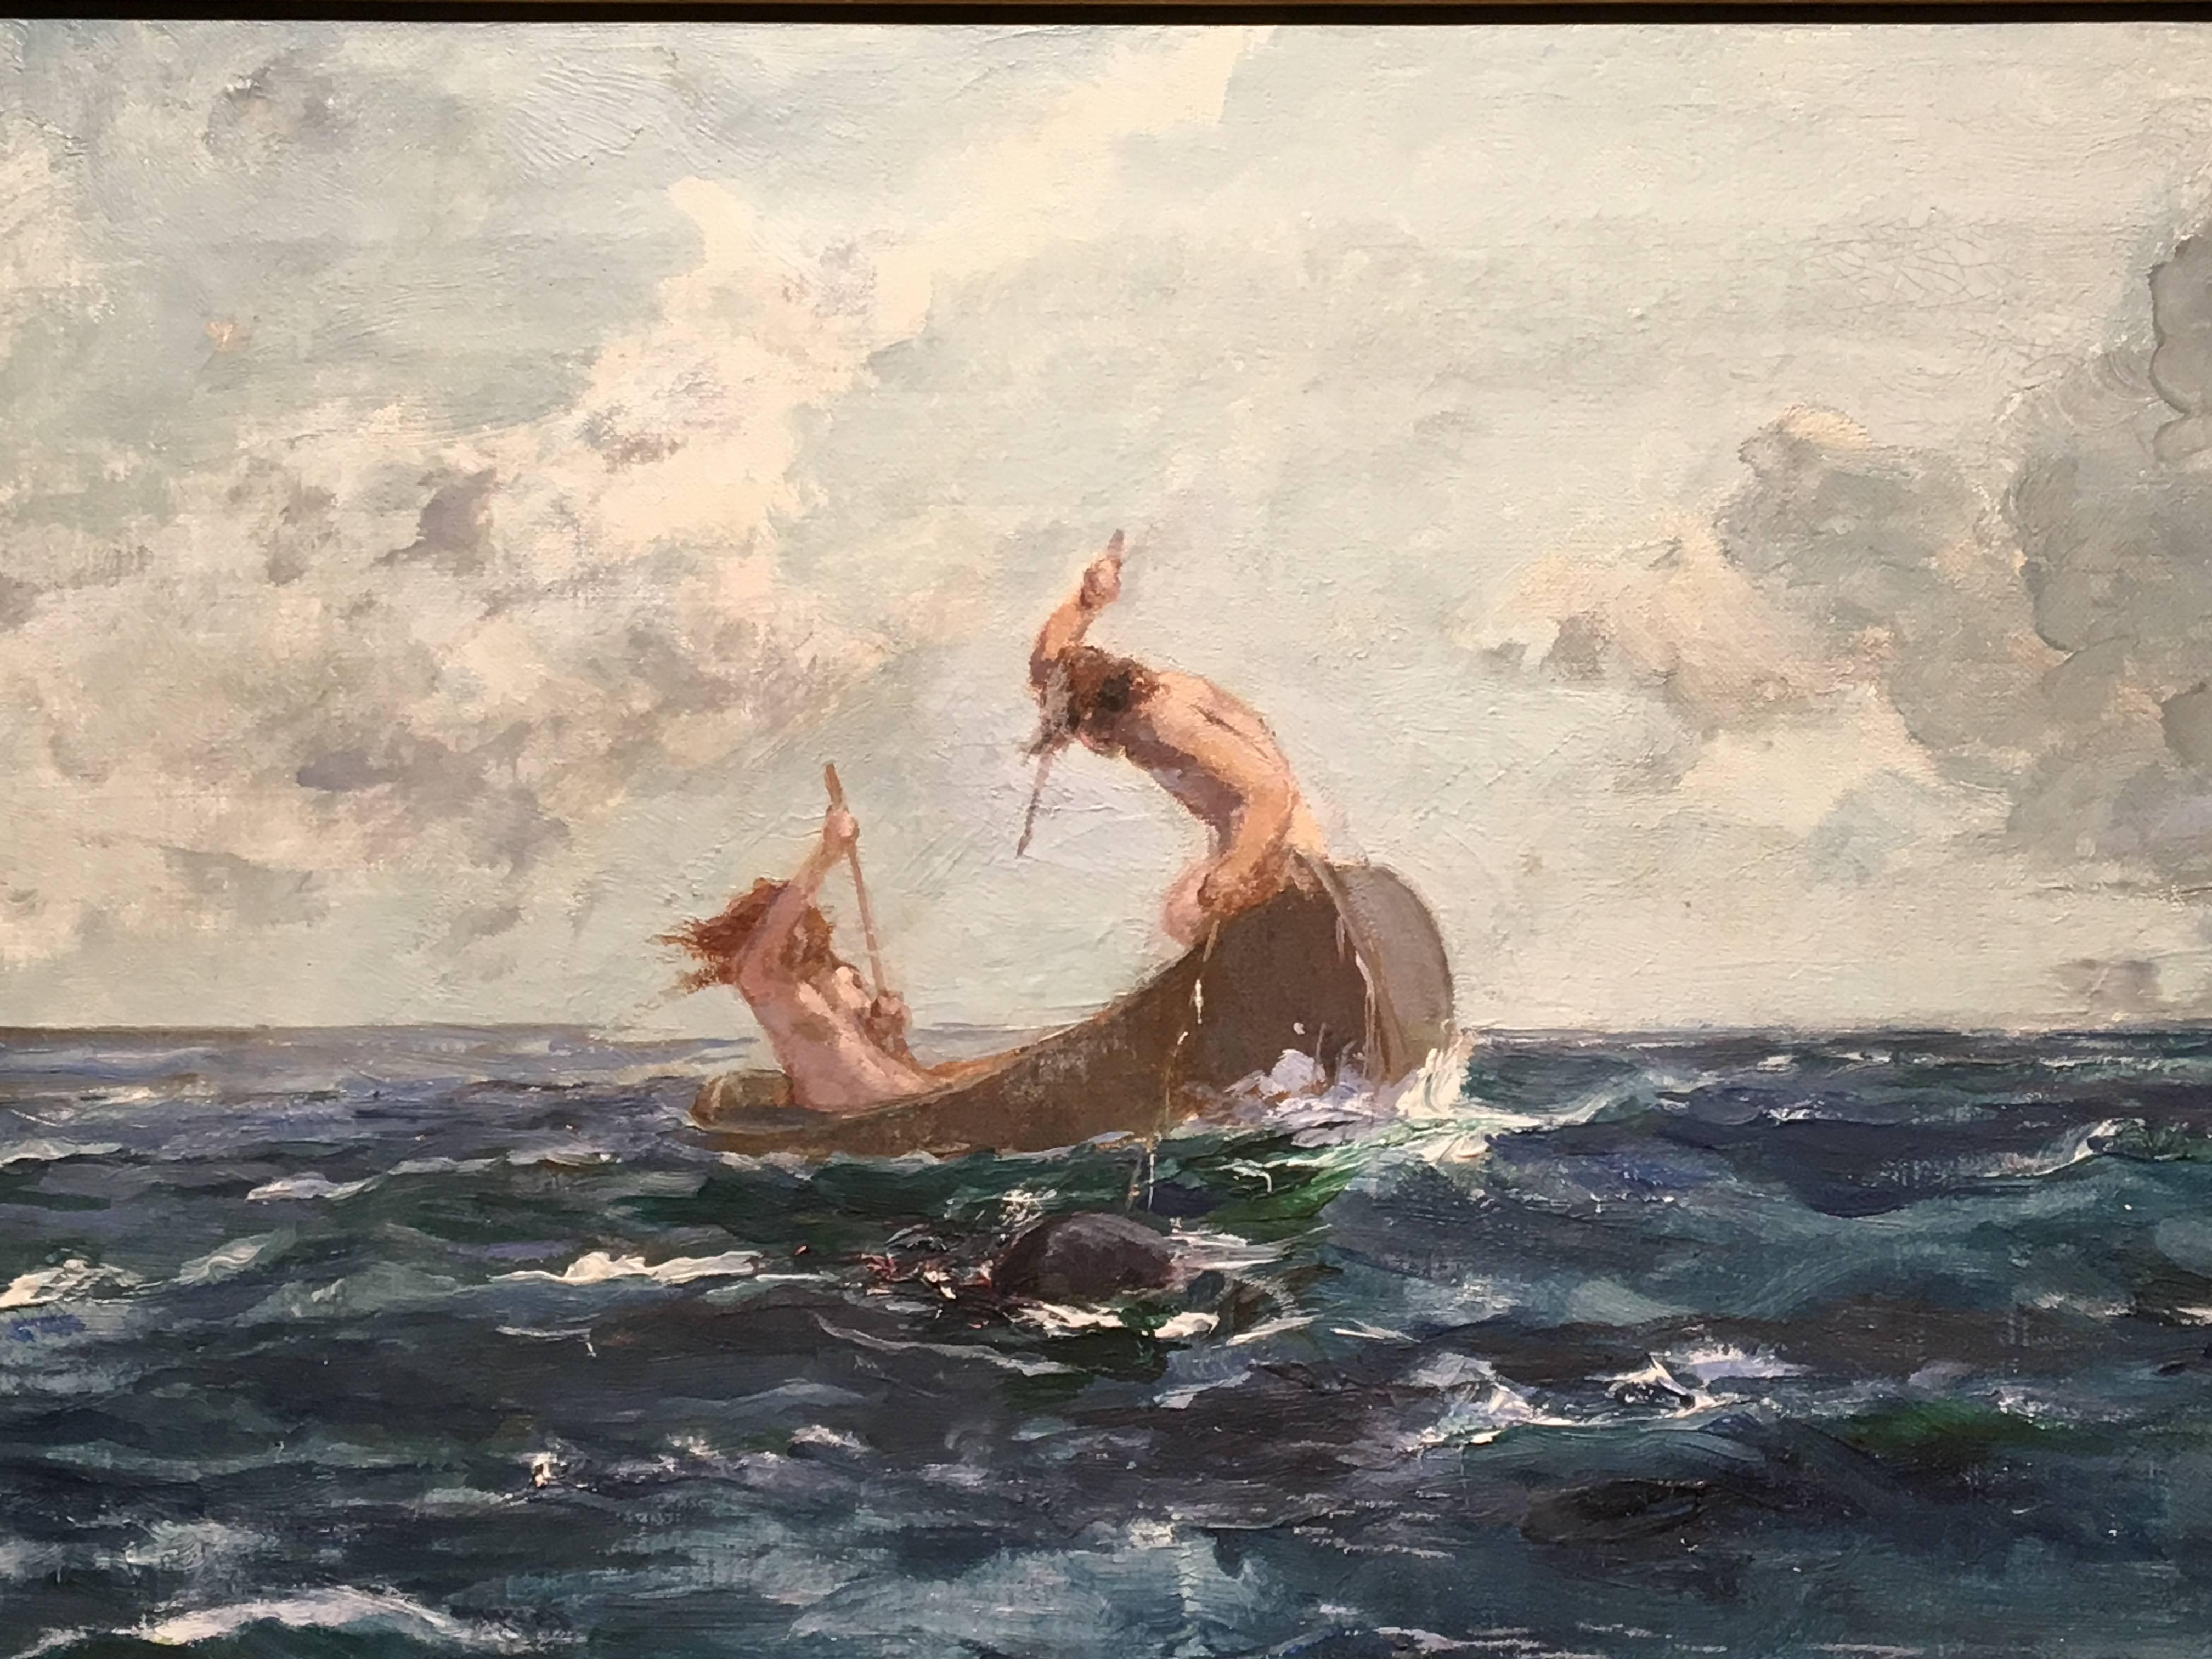 Alone in the sea - Painting by Edward Matthew Hale